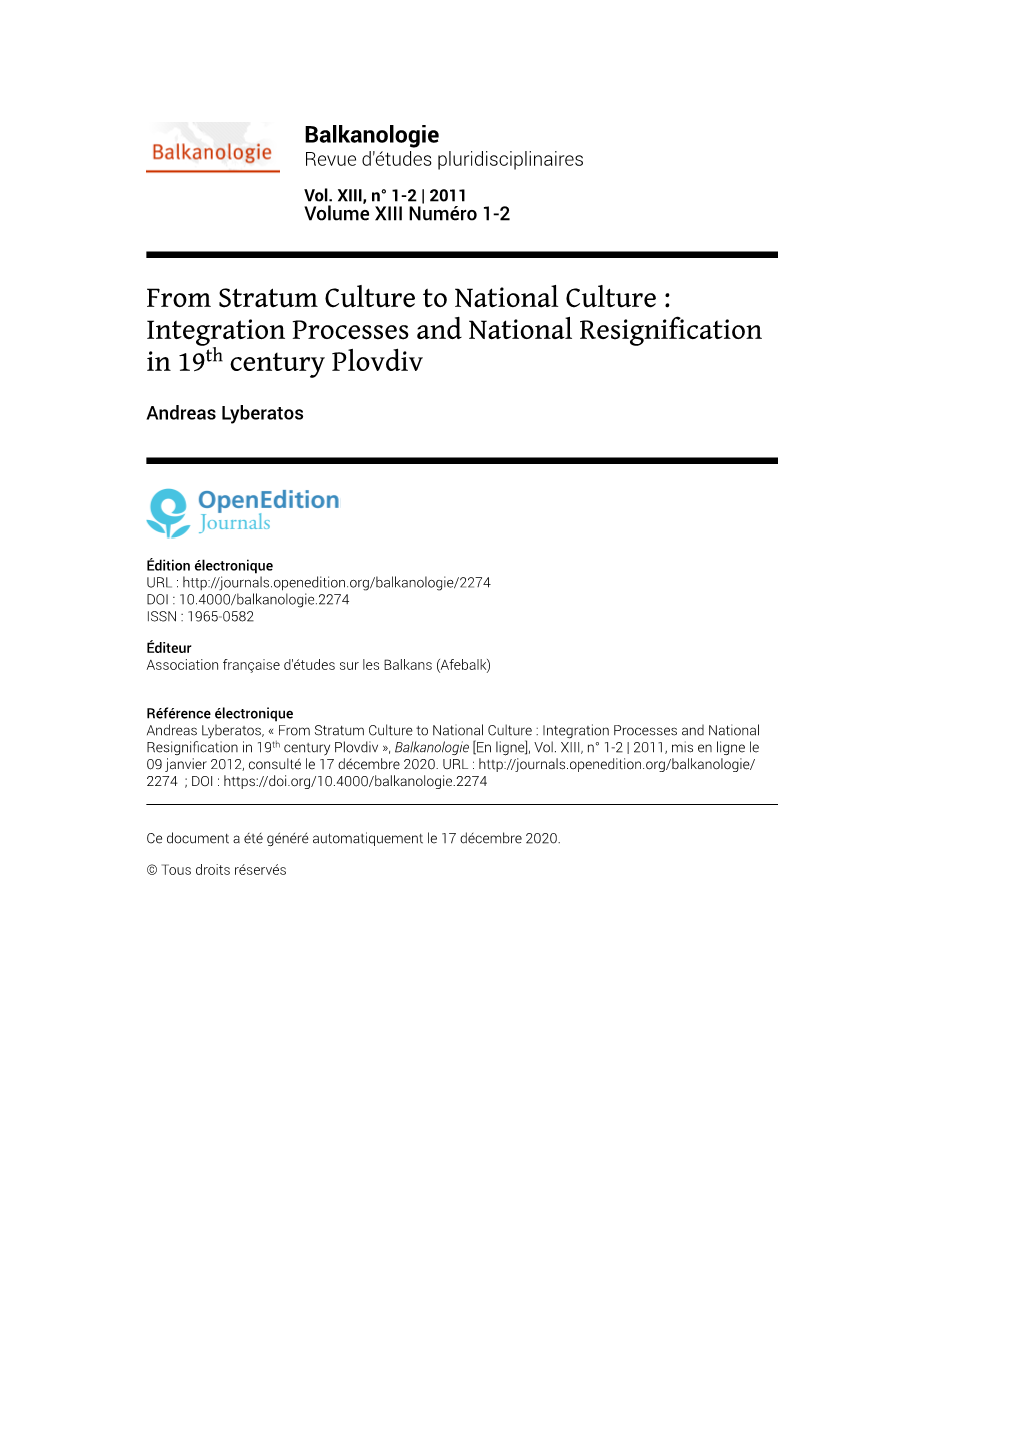 Balkanologie, Vol. XIII, N° 1-2 | 2011 from Stratum Culture to National Culture : Integration Processes and National